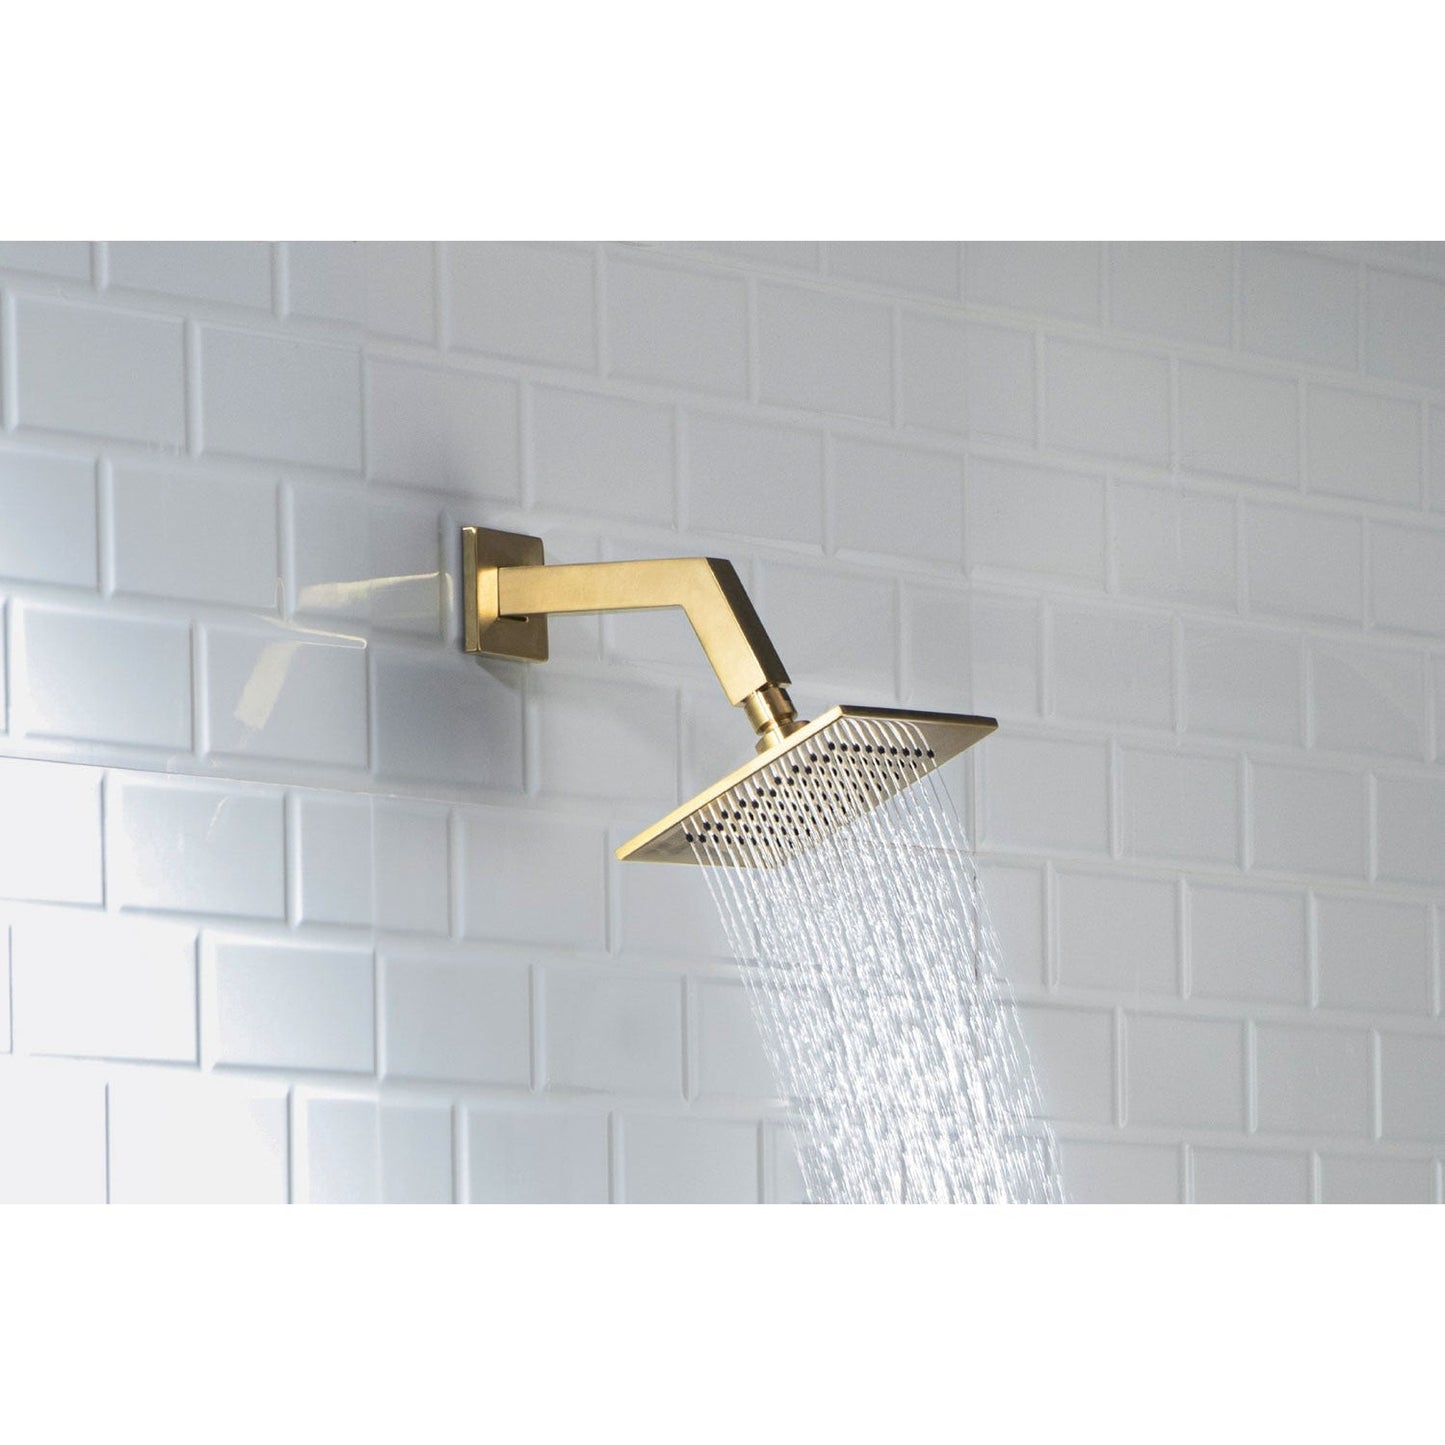 Isenberg Universal Fixtures 7" Matte Black Solid Brass Wall-Mounted Standard Shower Arm With Square Sliding Flange